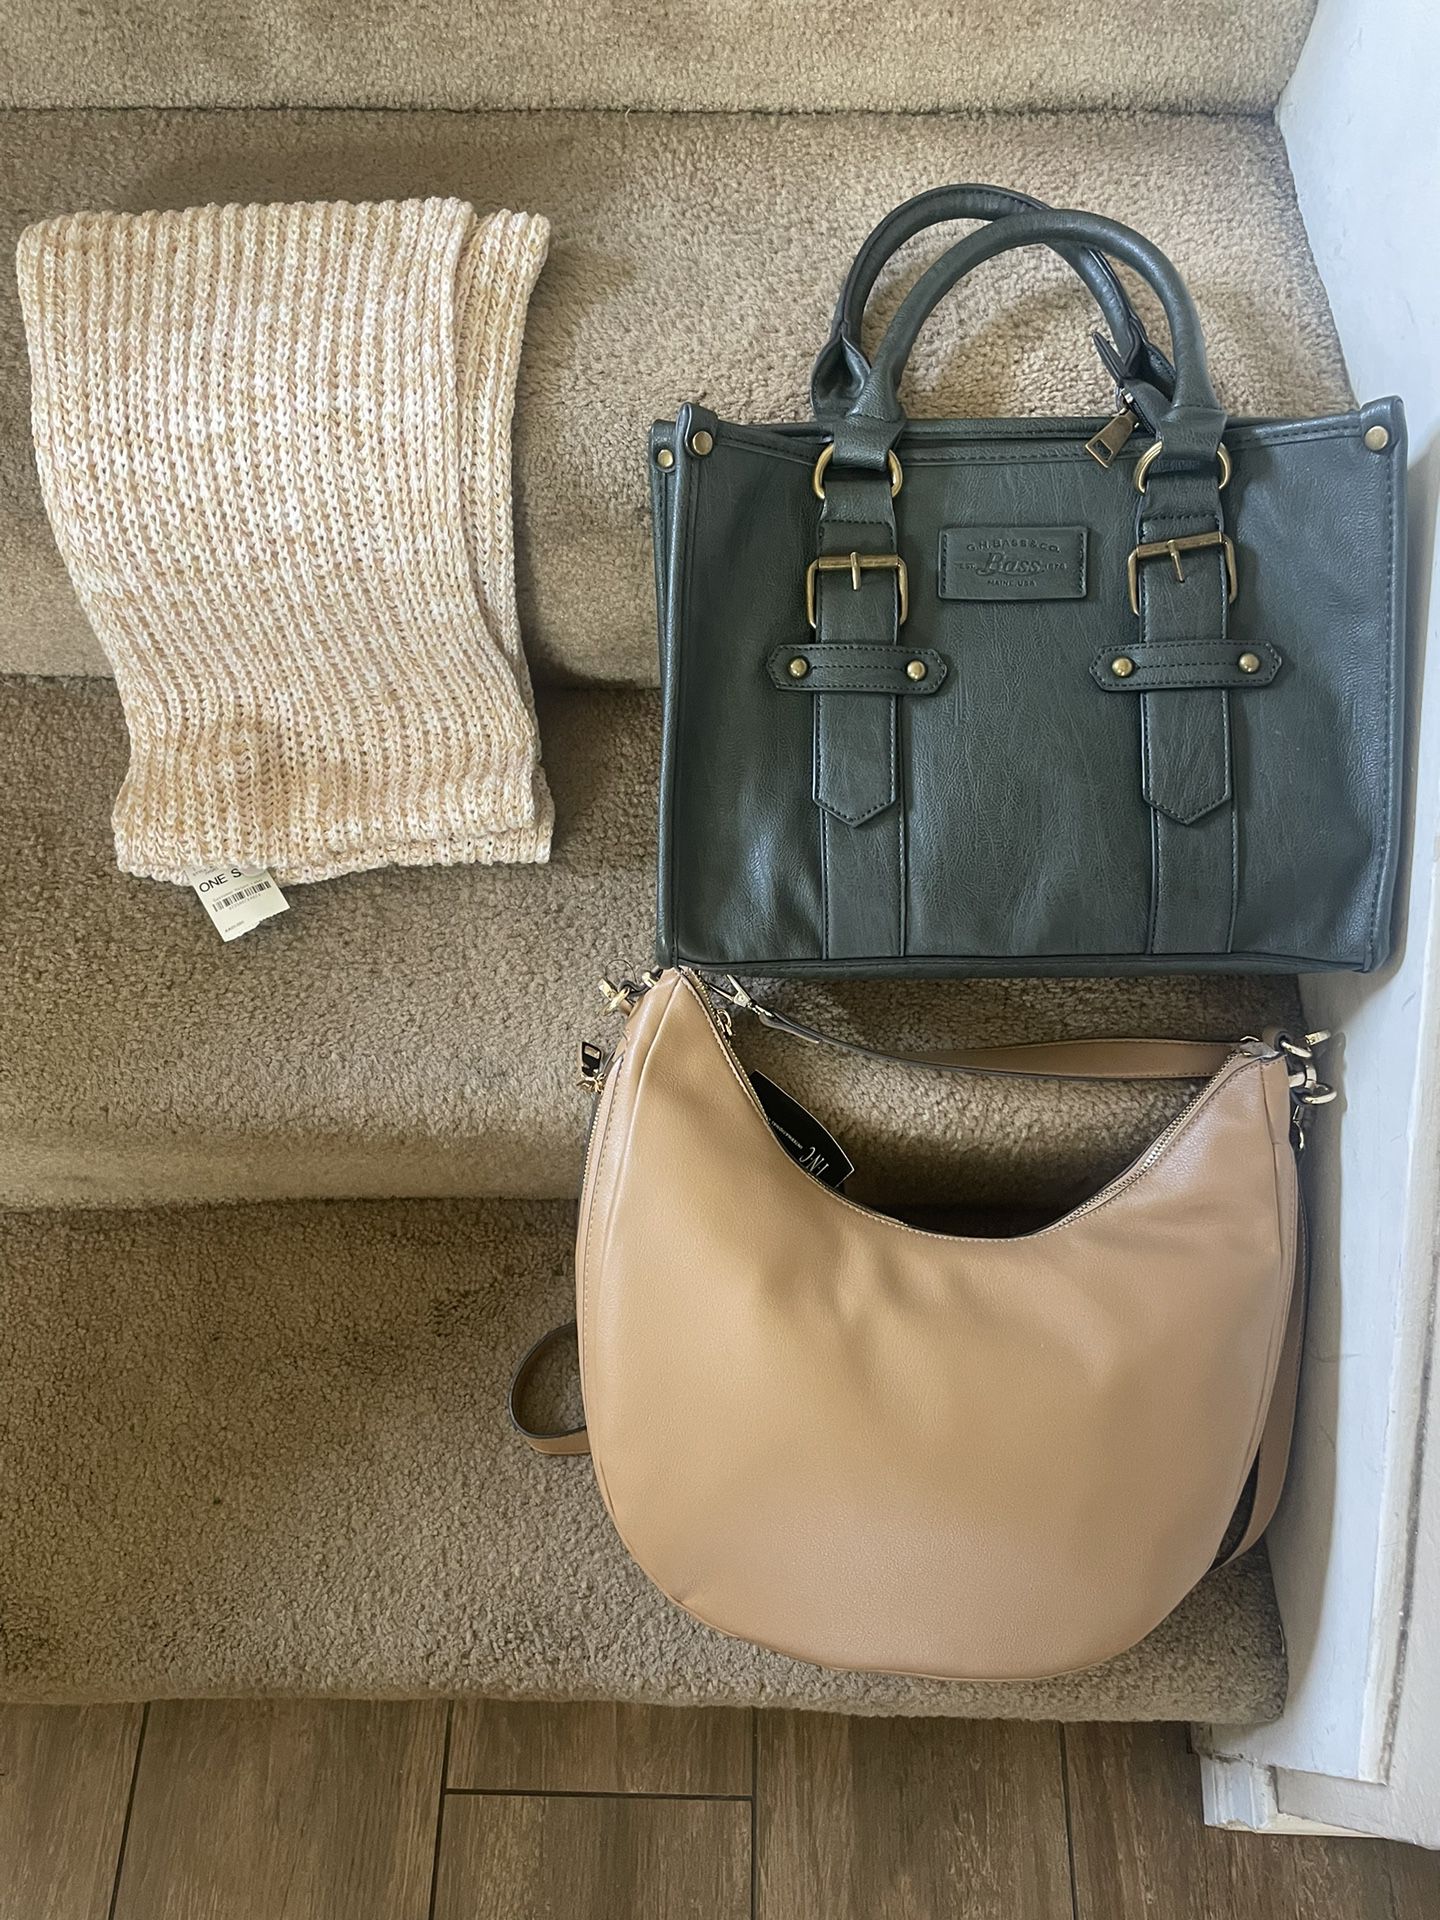 Purse for Sale in Chino, CA - OfferUp